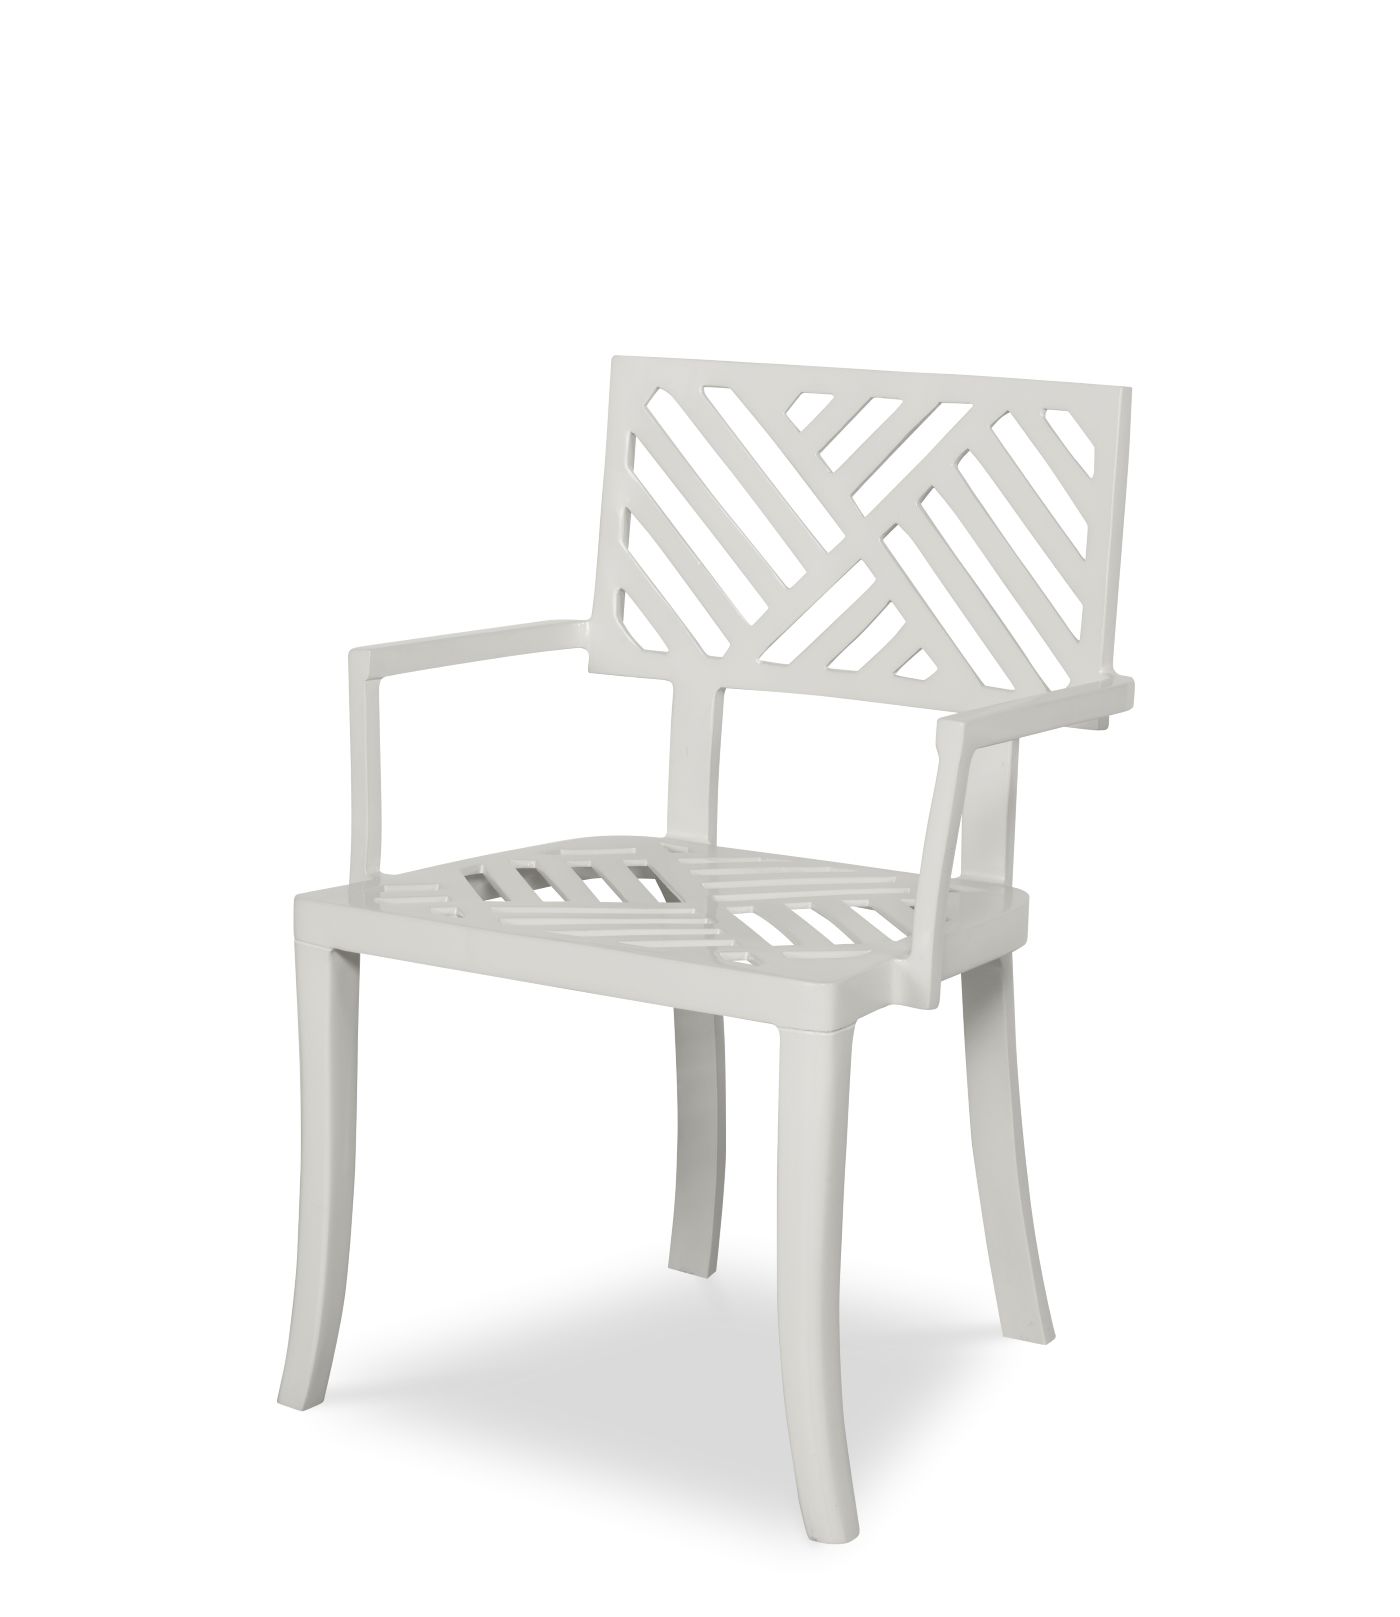 SLOAN OUTDOOR DINING ARM CHAIR